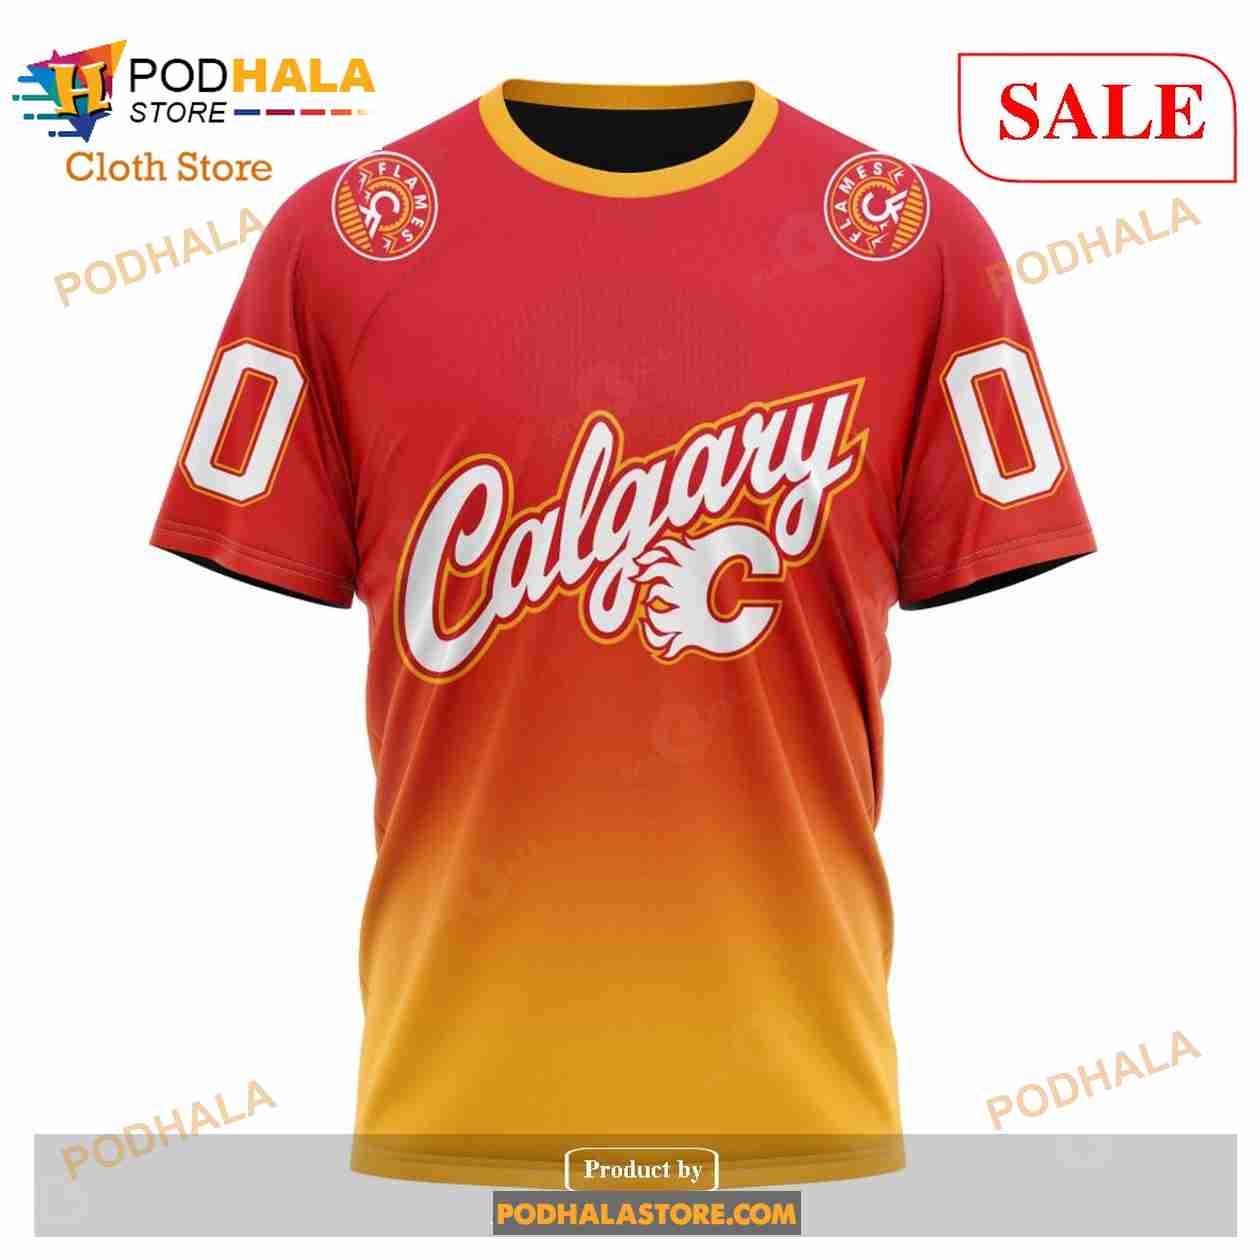 The best selling] Personalized NHL Calgary Flames Reverse Retro